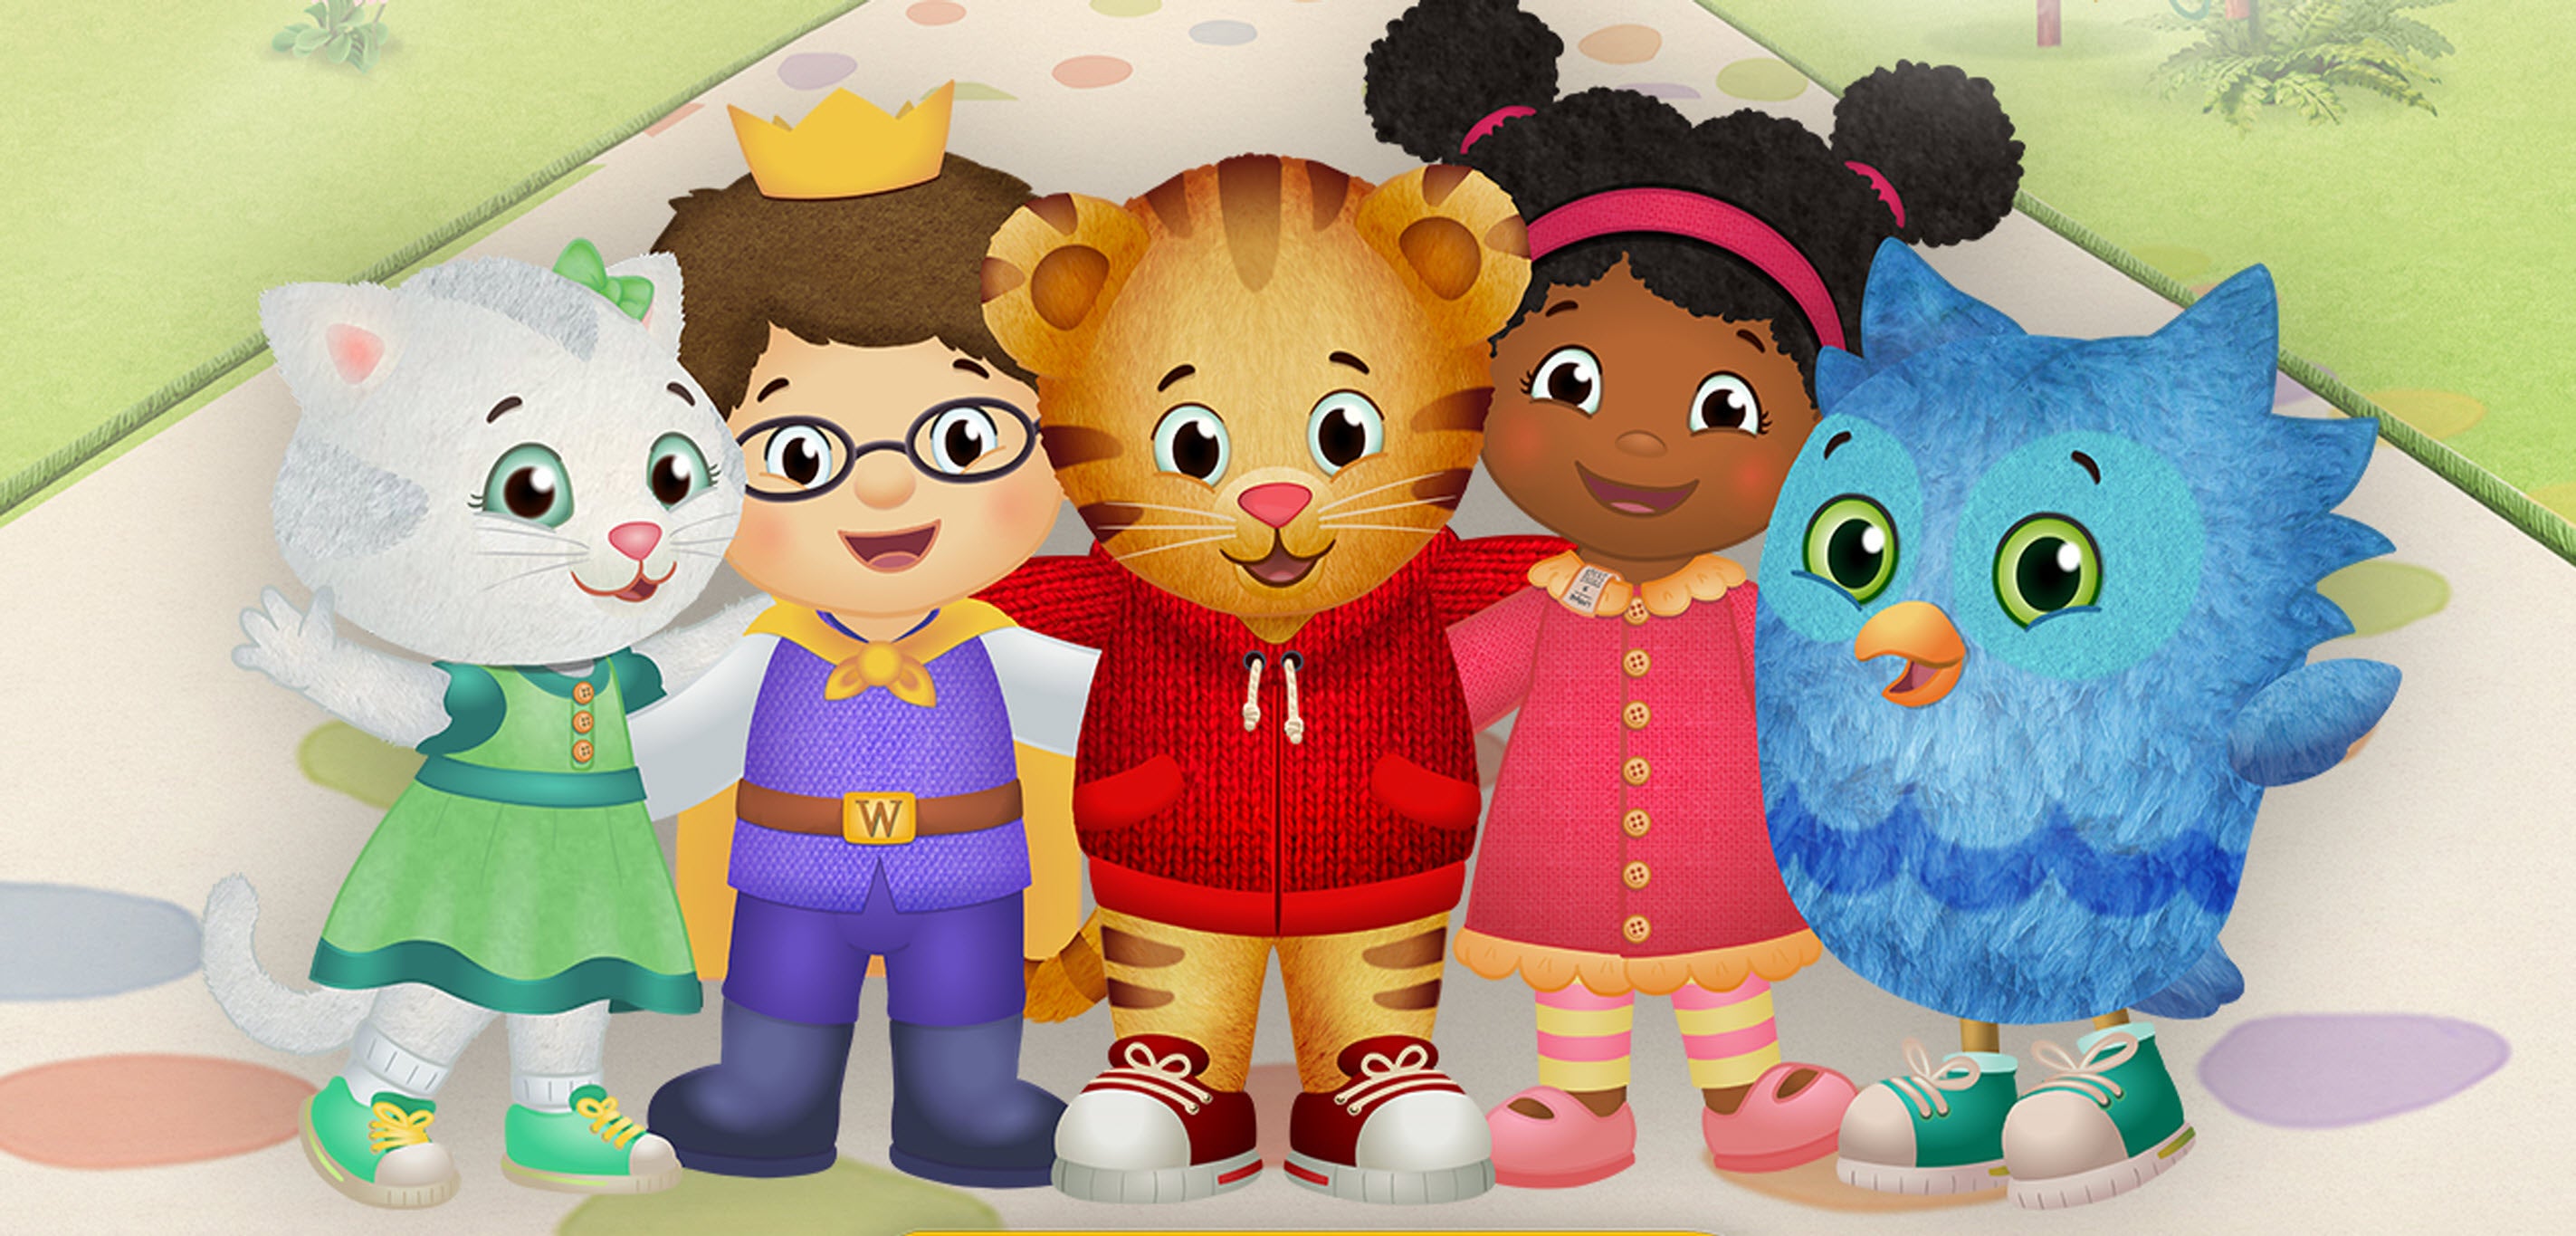 Daniel Tiger's Neighborhood LIVE: King for a Day! in St Petersburg promo photo for Valentine's Day  presale offer code